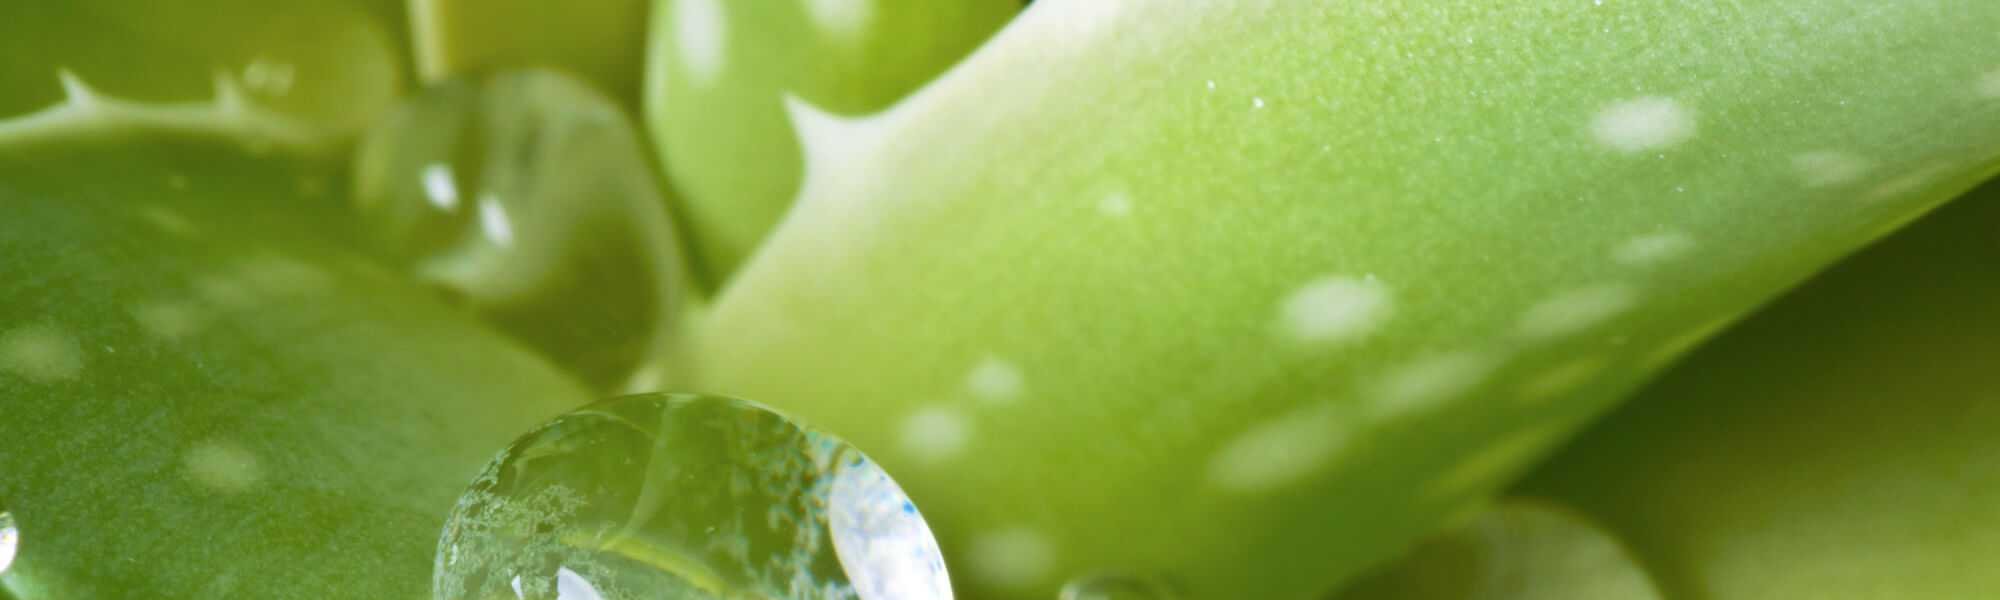 Aloe Vera For The Skin   How To Use This Miracle Plant